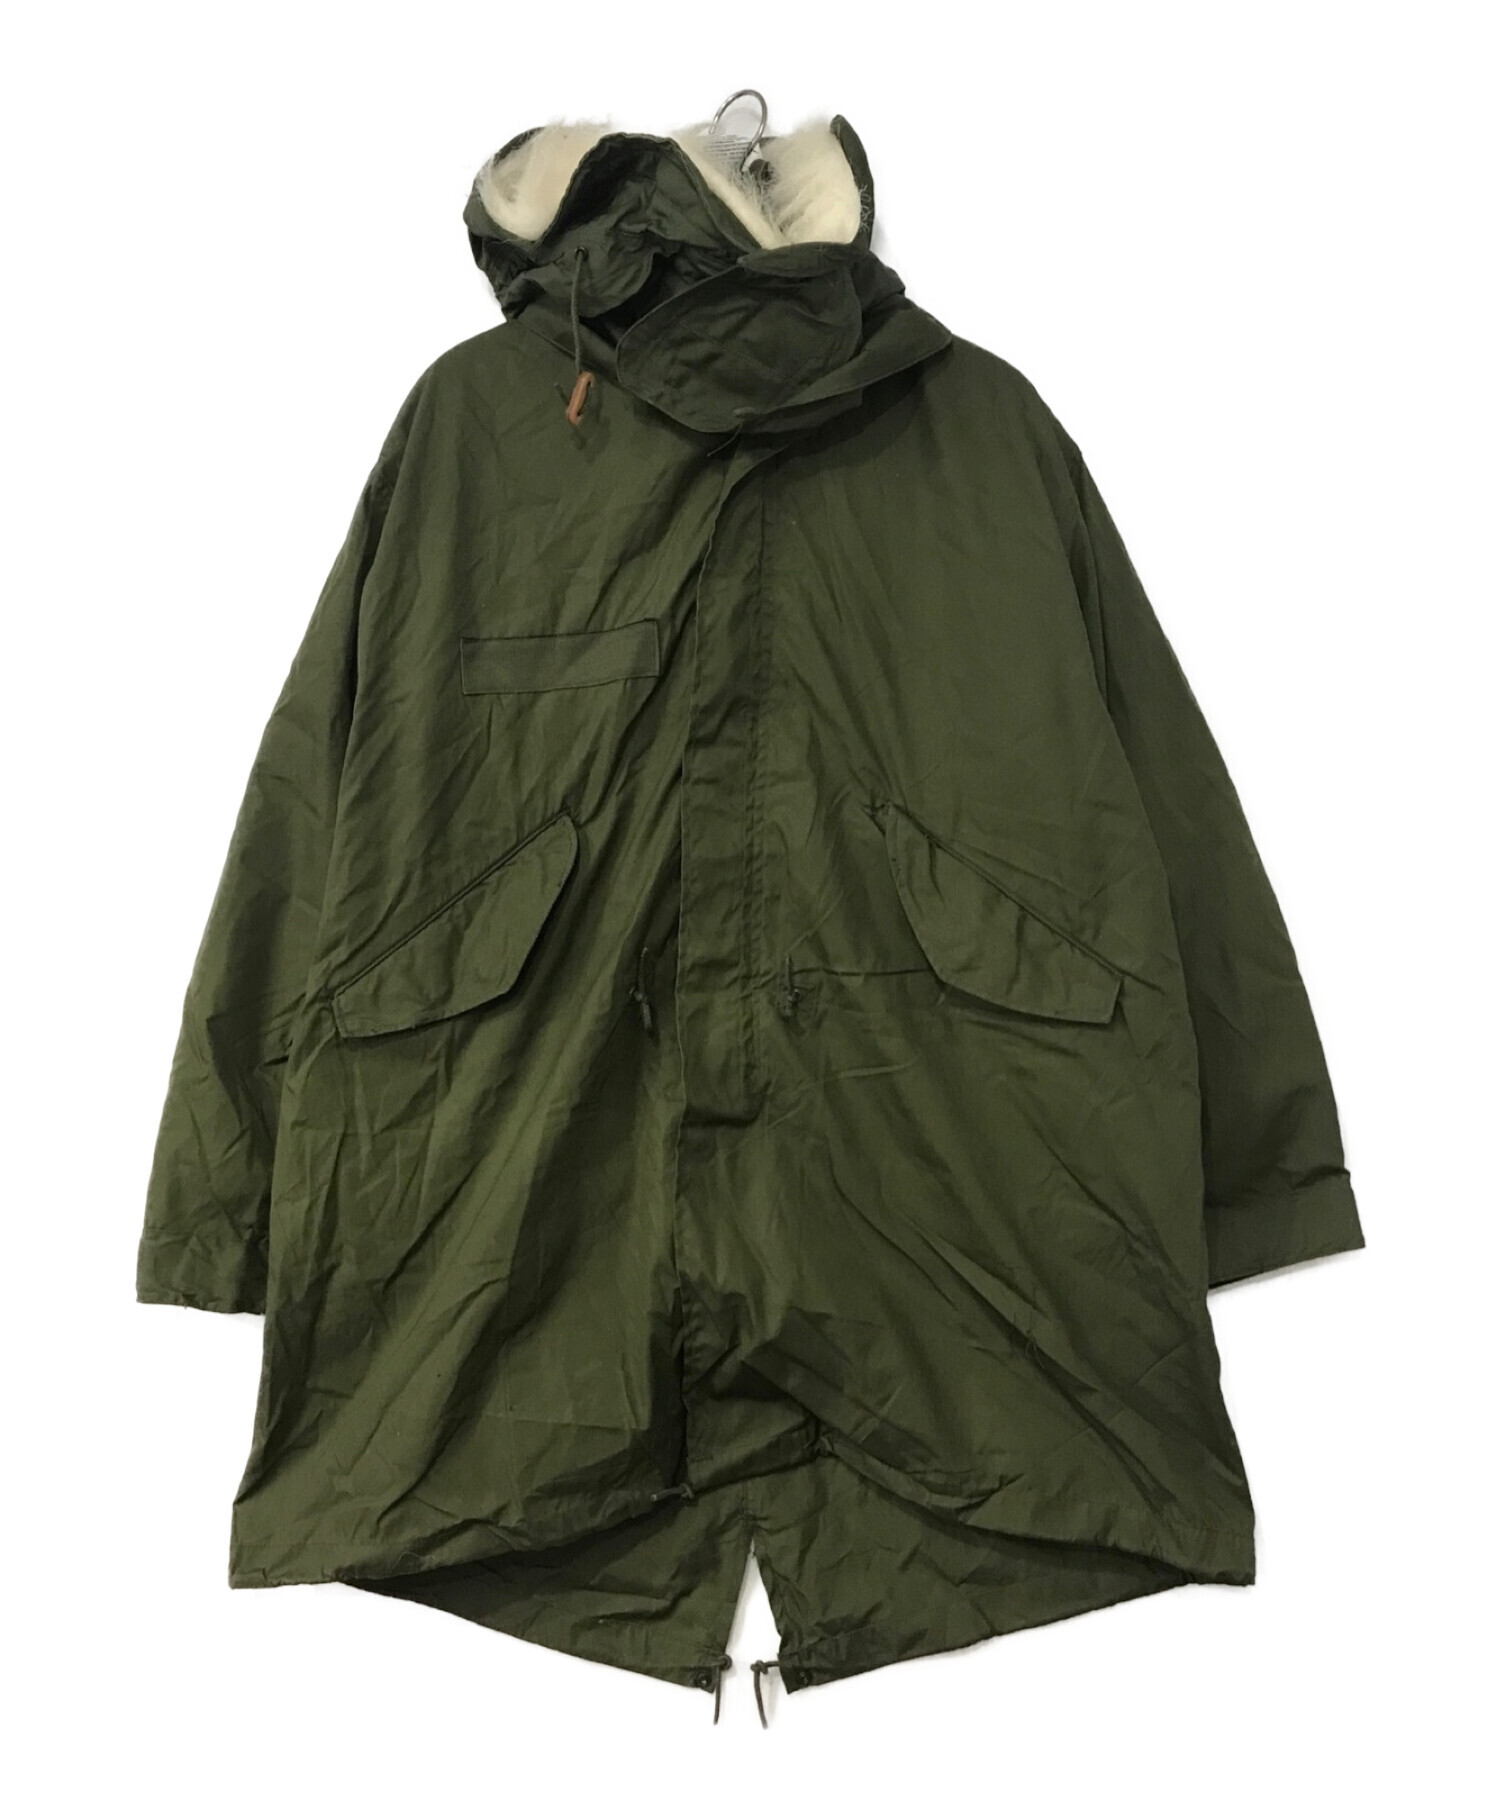 US.ARMY (ユーエスアーミー) M-65 EXTREME COLD WEATHER PARKA カーキ サイズ:M